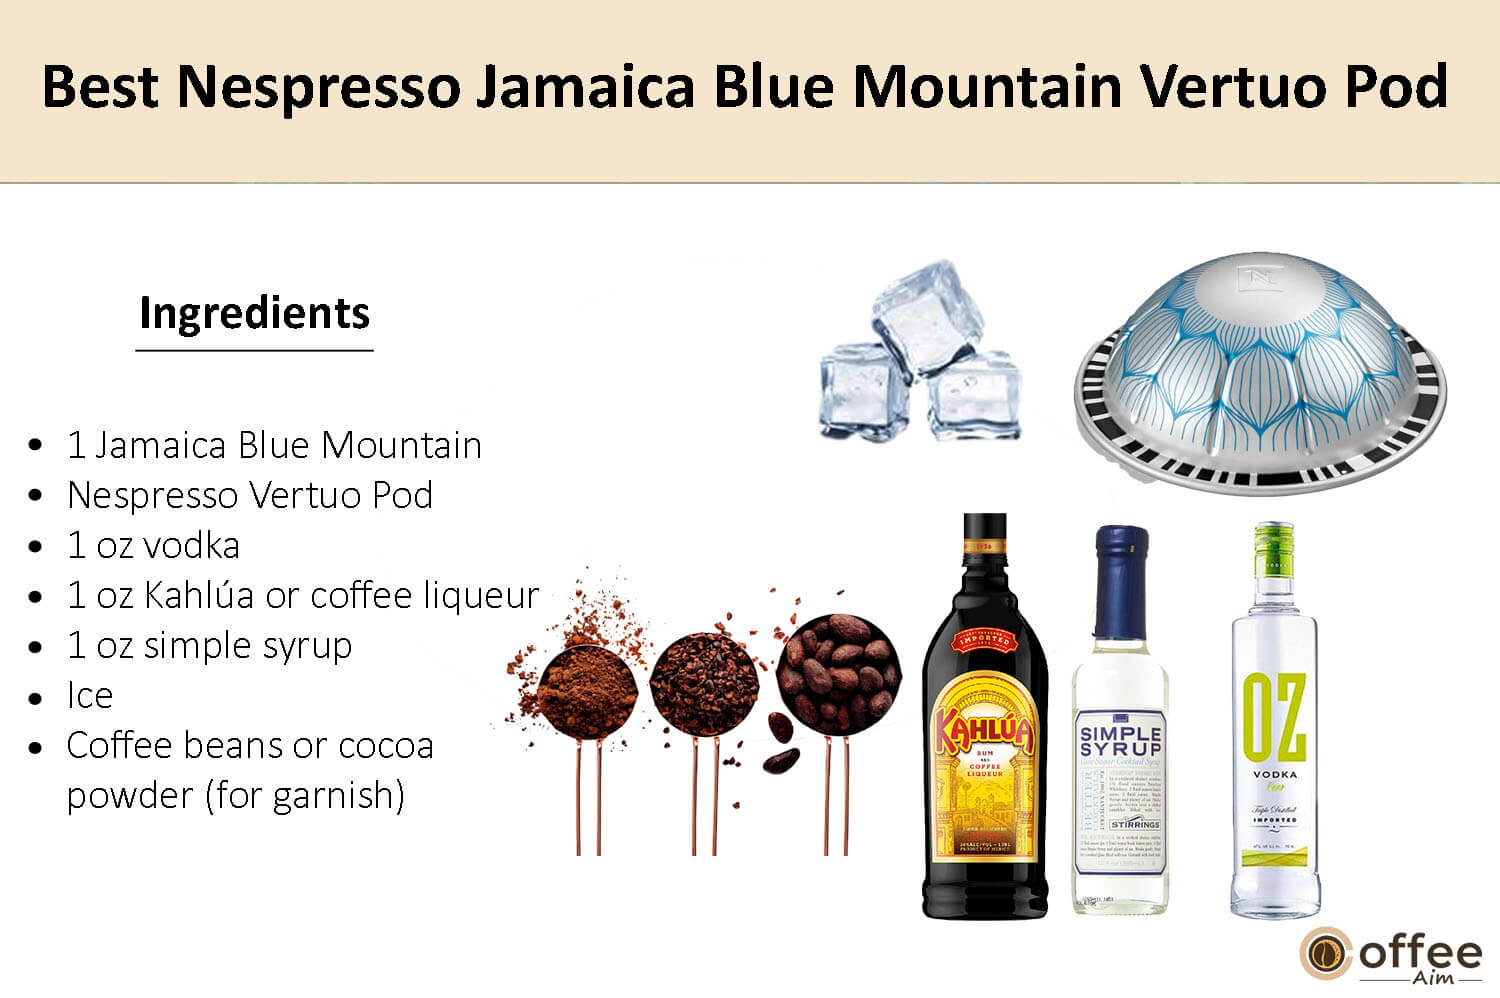 In this image, I elucidate the components that comprise the finest Nespresso Jamaica Blue Mountain Vertuo coffee pod.